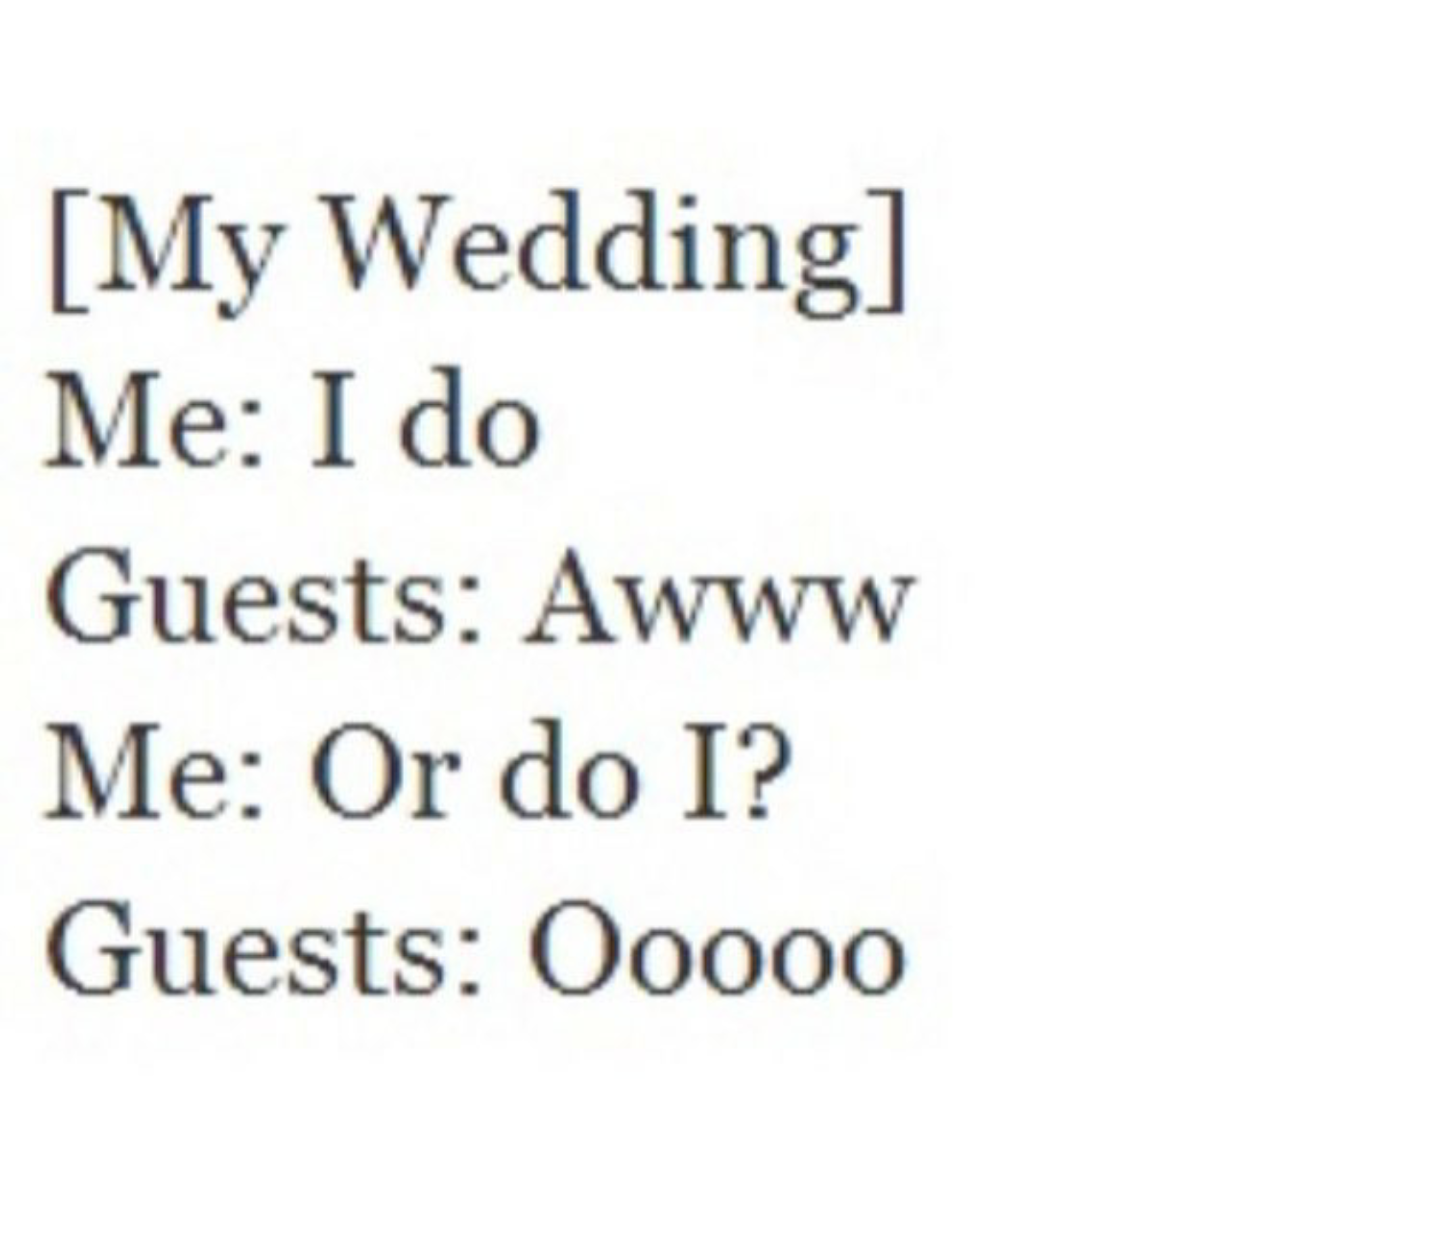 hopeless romantic quotes - My Wedding Me I do Guests Awww Me Or do I? Guests 00000